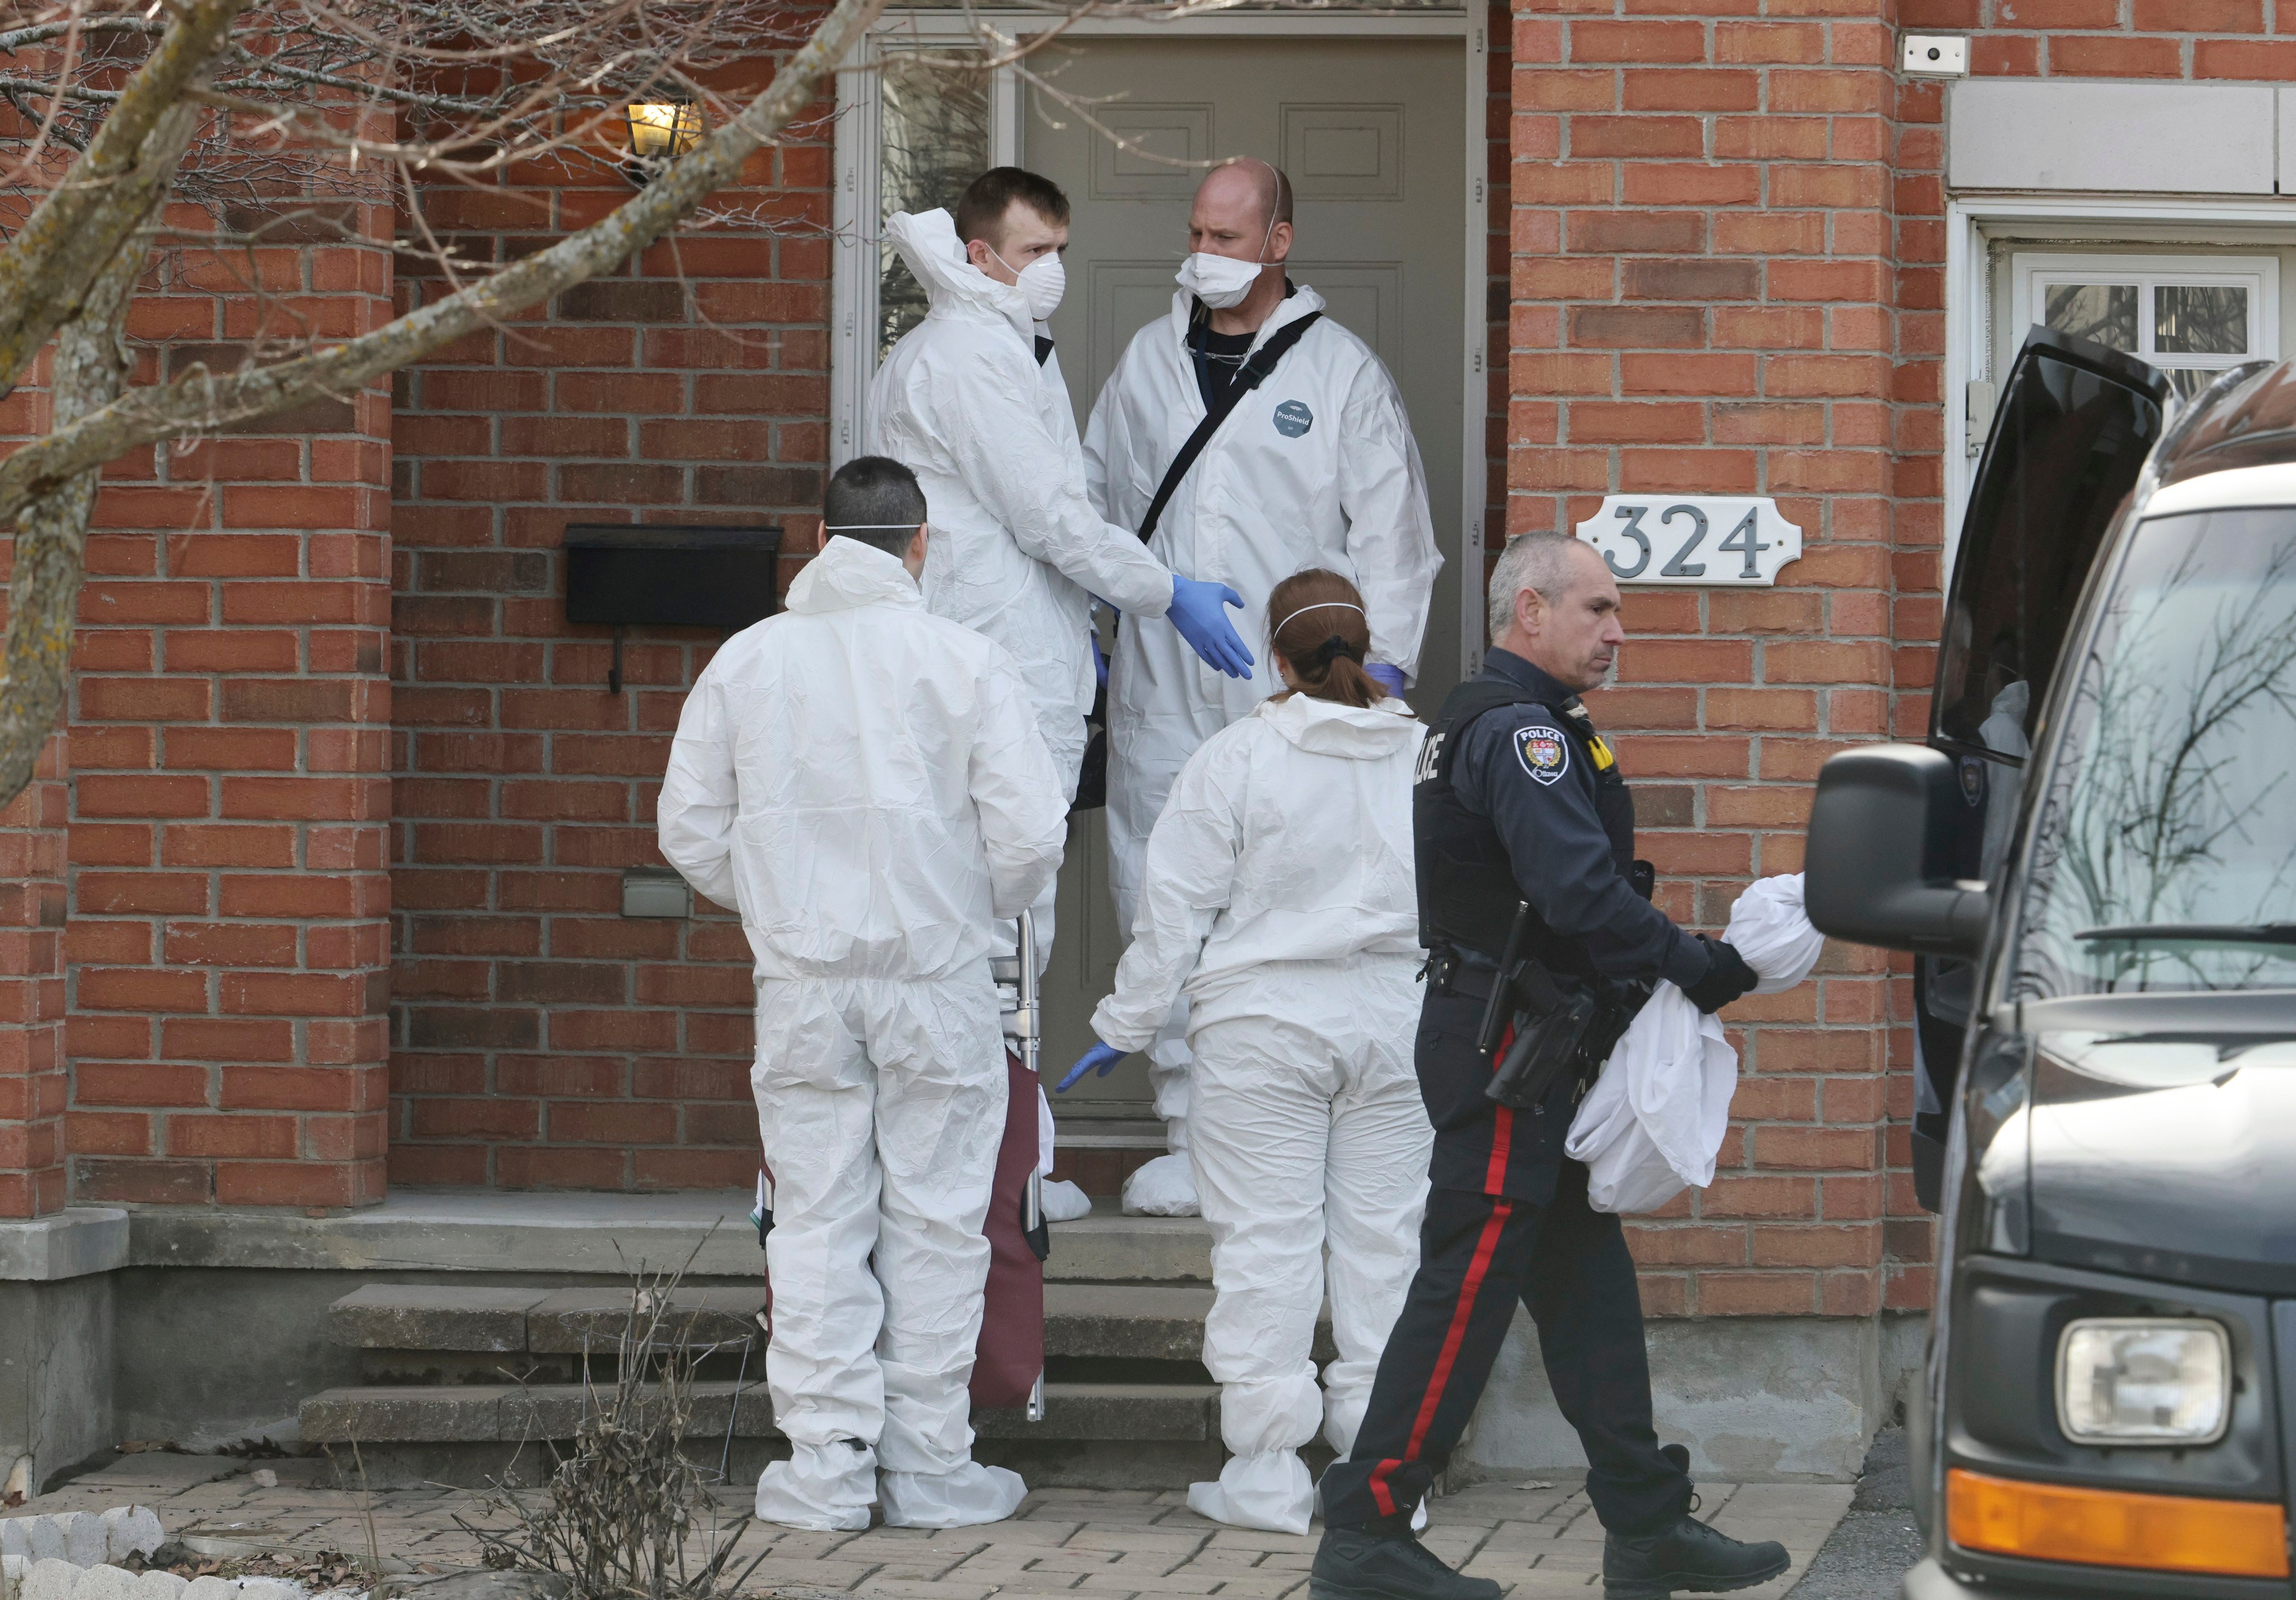 Members of the coroner’s office stand outside the scene of a homicide where six people were found dead in the Barrhaven suburb of Ottawa on Thursday. Photo: Canadian Press via AP